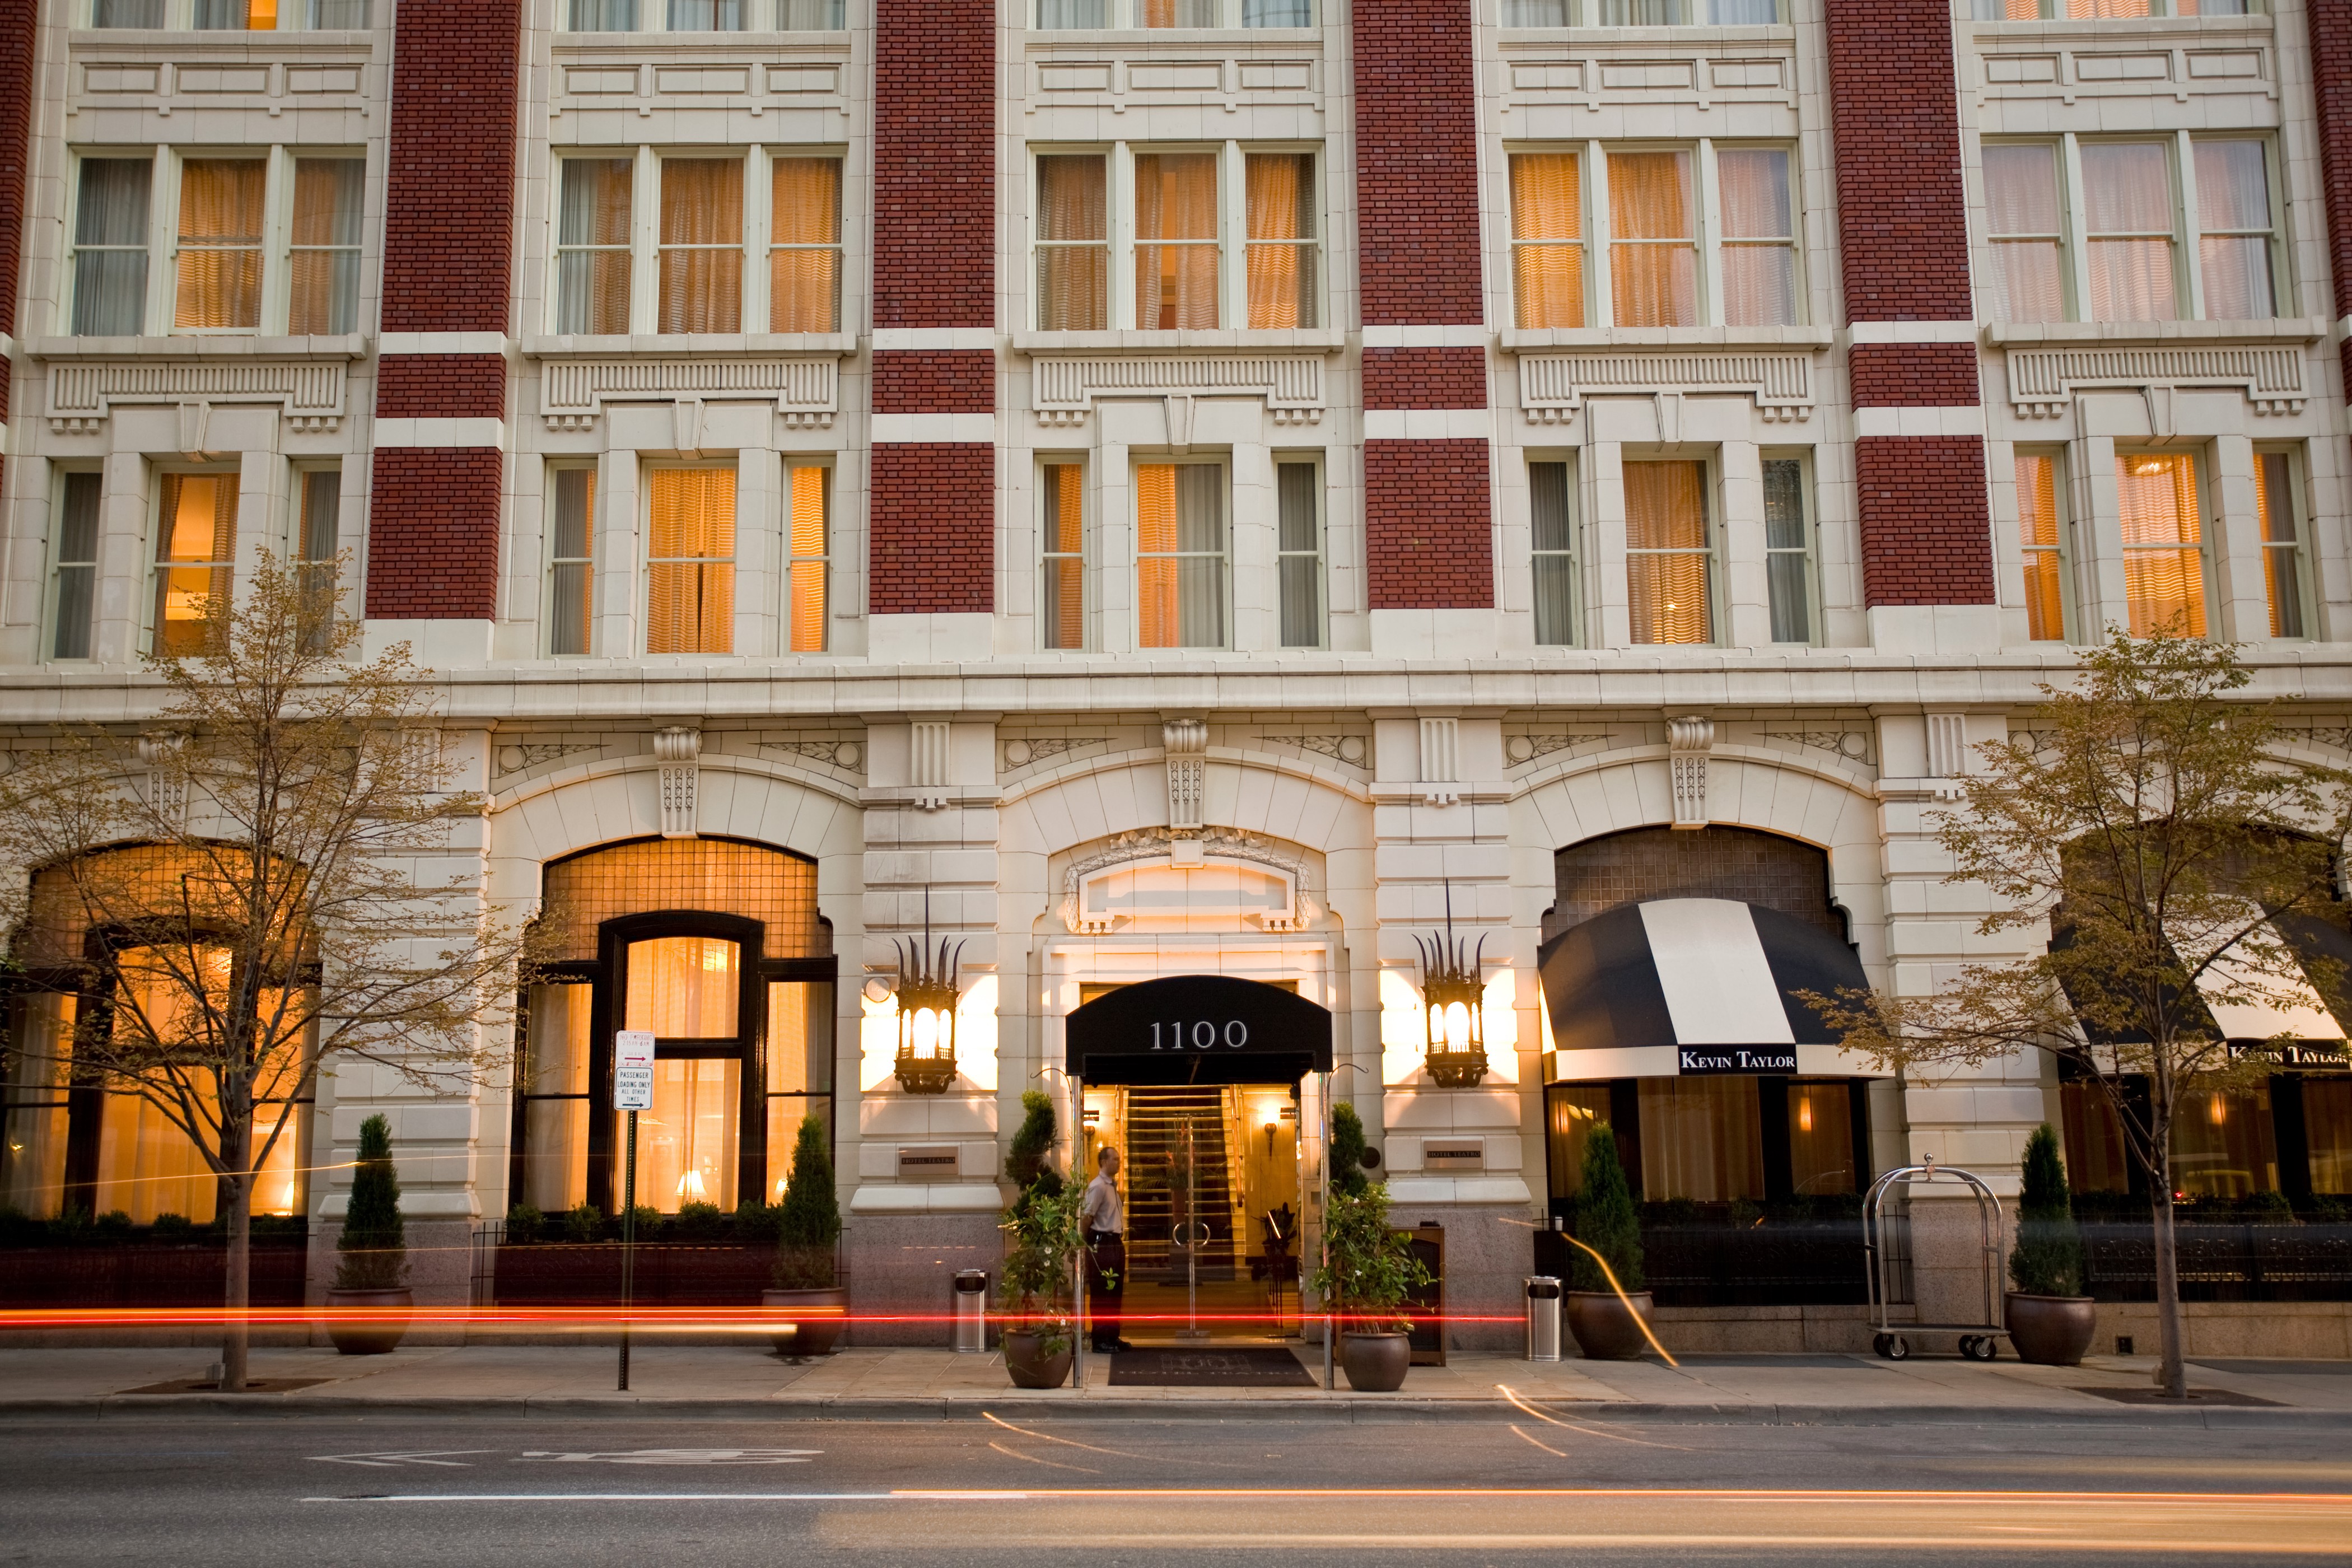 Hotel Teatro is a Four-Diamond Boutique Denver Hotel conveniently located in the heart of Downtown Denver.